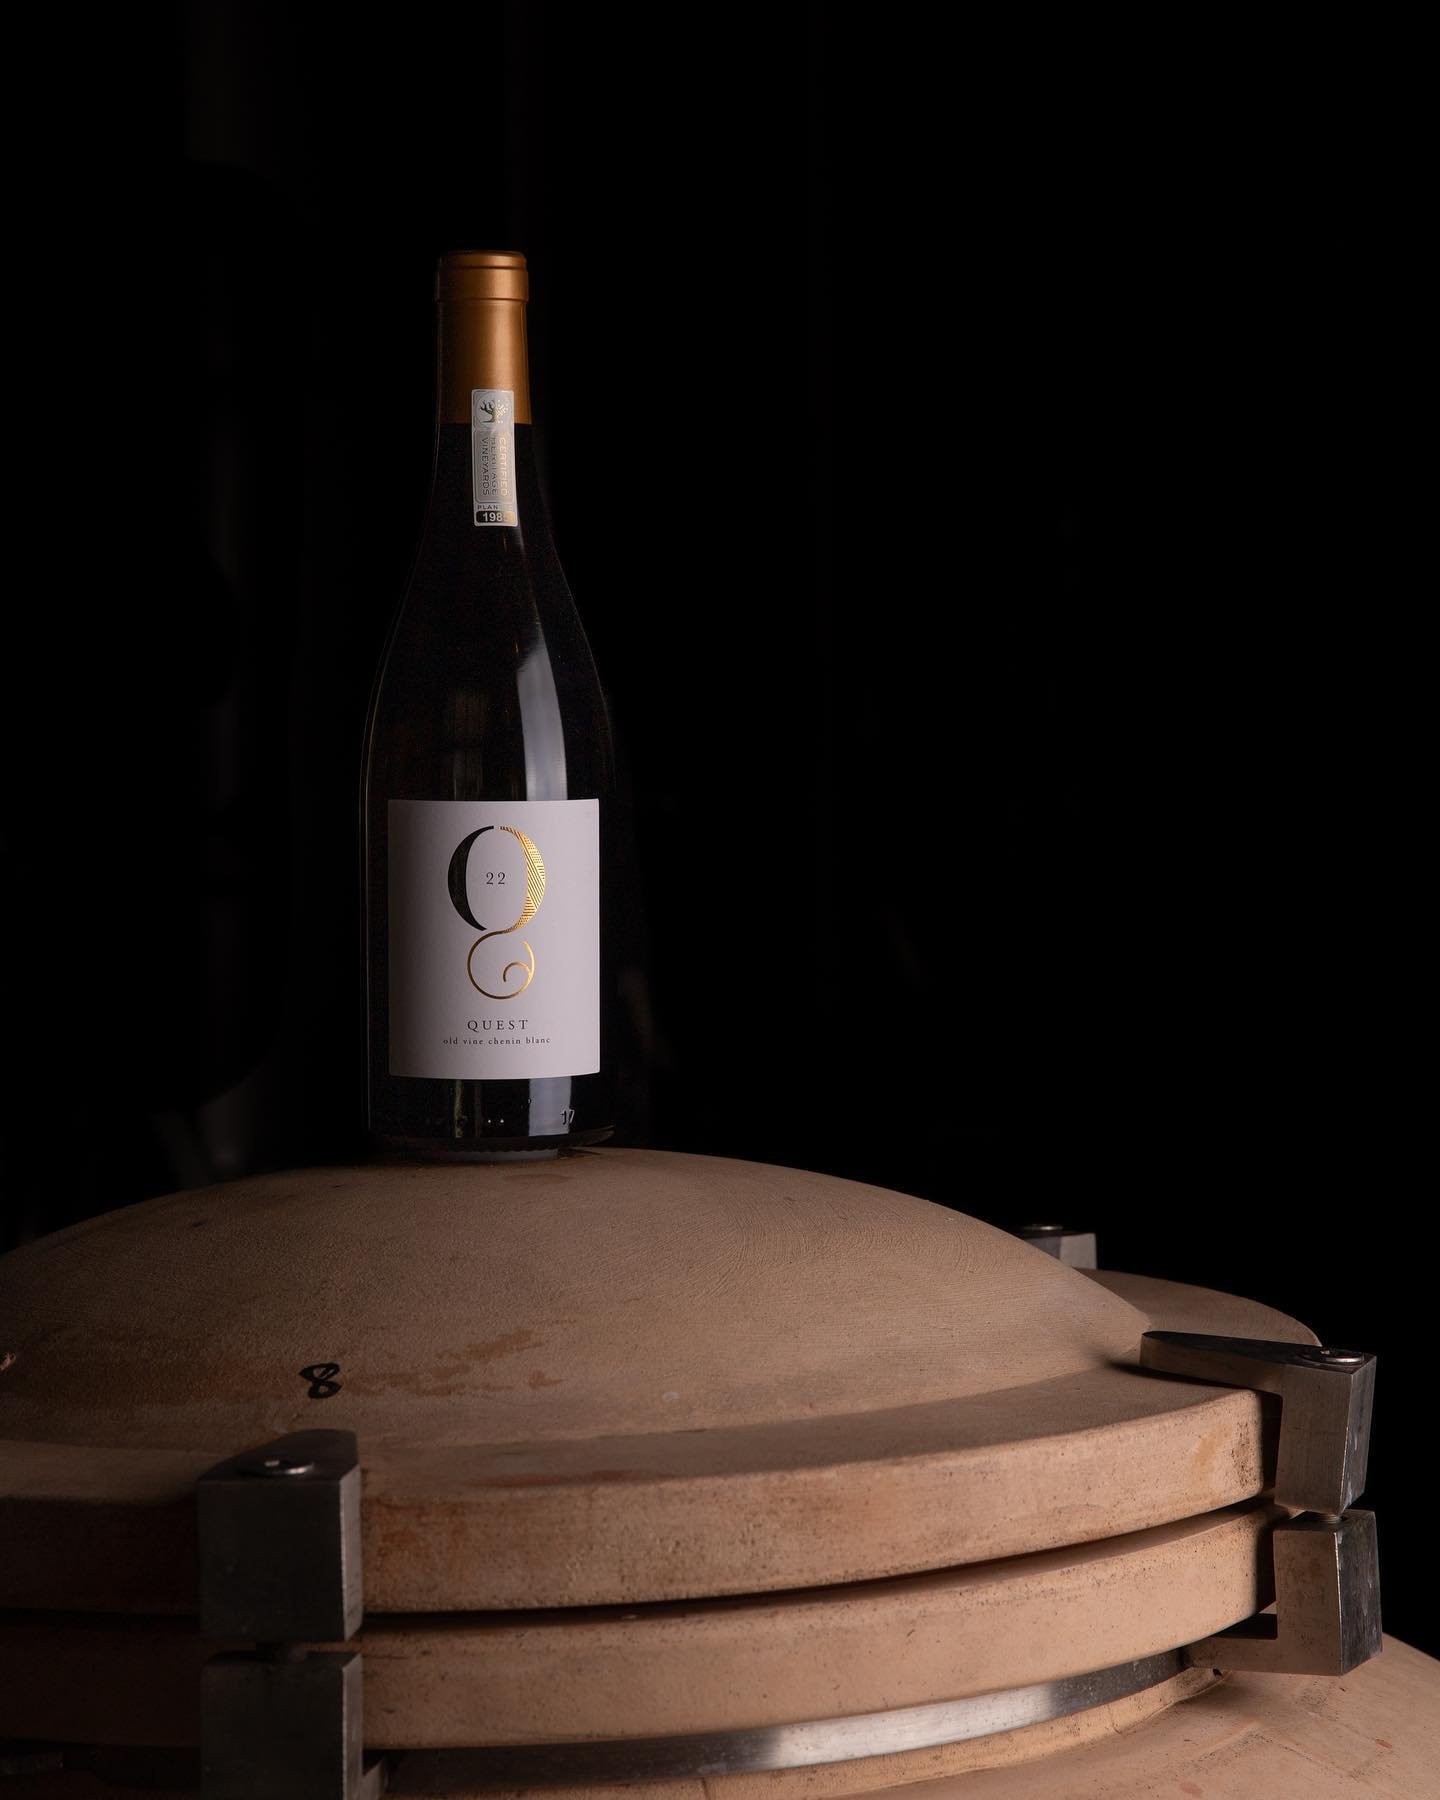 A focus on one of our old vine Chenins, the Decanter and IWC 95 point awarded Quest Old Vine Chenin Blanc 2022. This beautiful wine was described by Decanter as &ldquo;Pleasant and attractive aromas of ripe yellow pear, melon, pineapple, peach, quinc